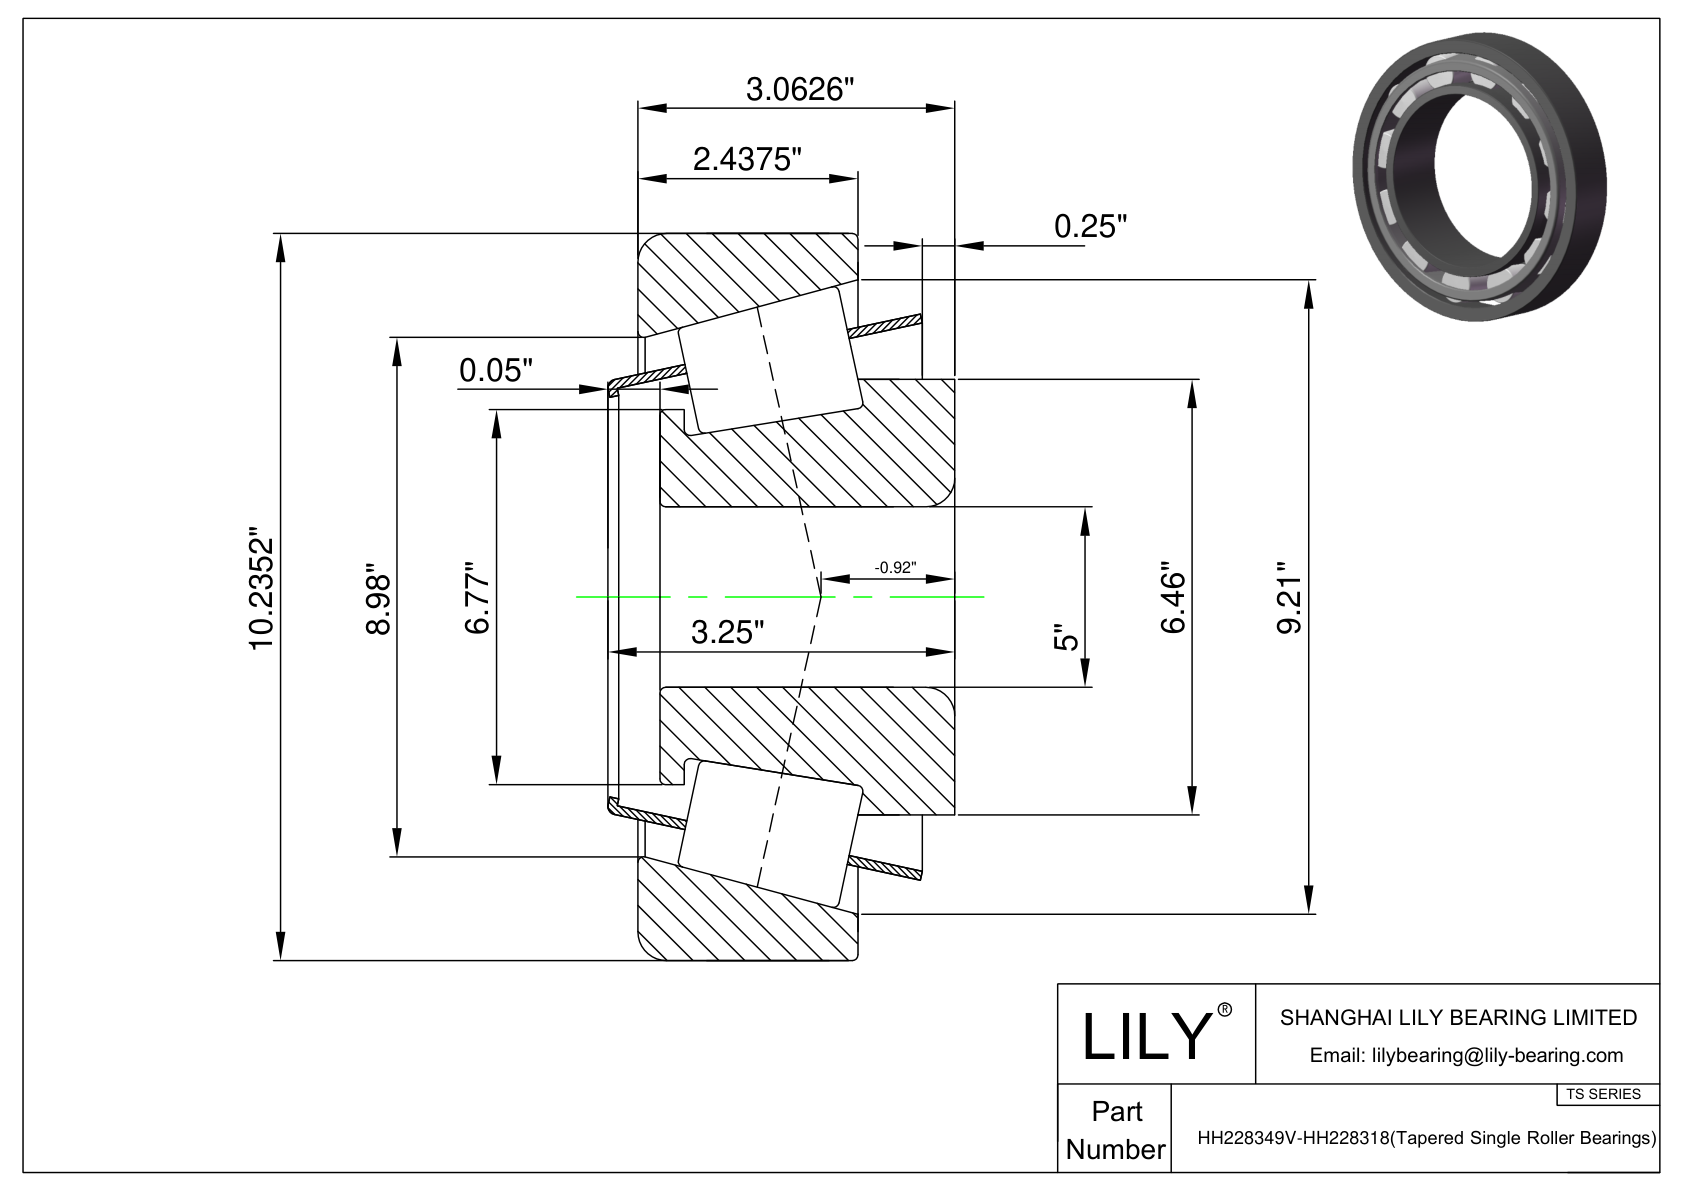 HH228349V-HH228318 TS (Tapered Single Roller Bearings) (Imperial) cad drawing